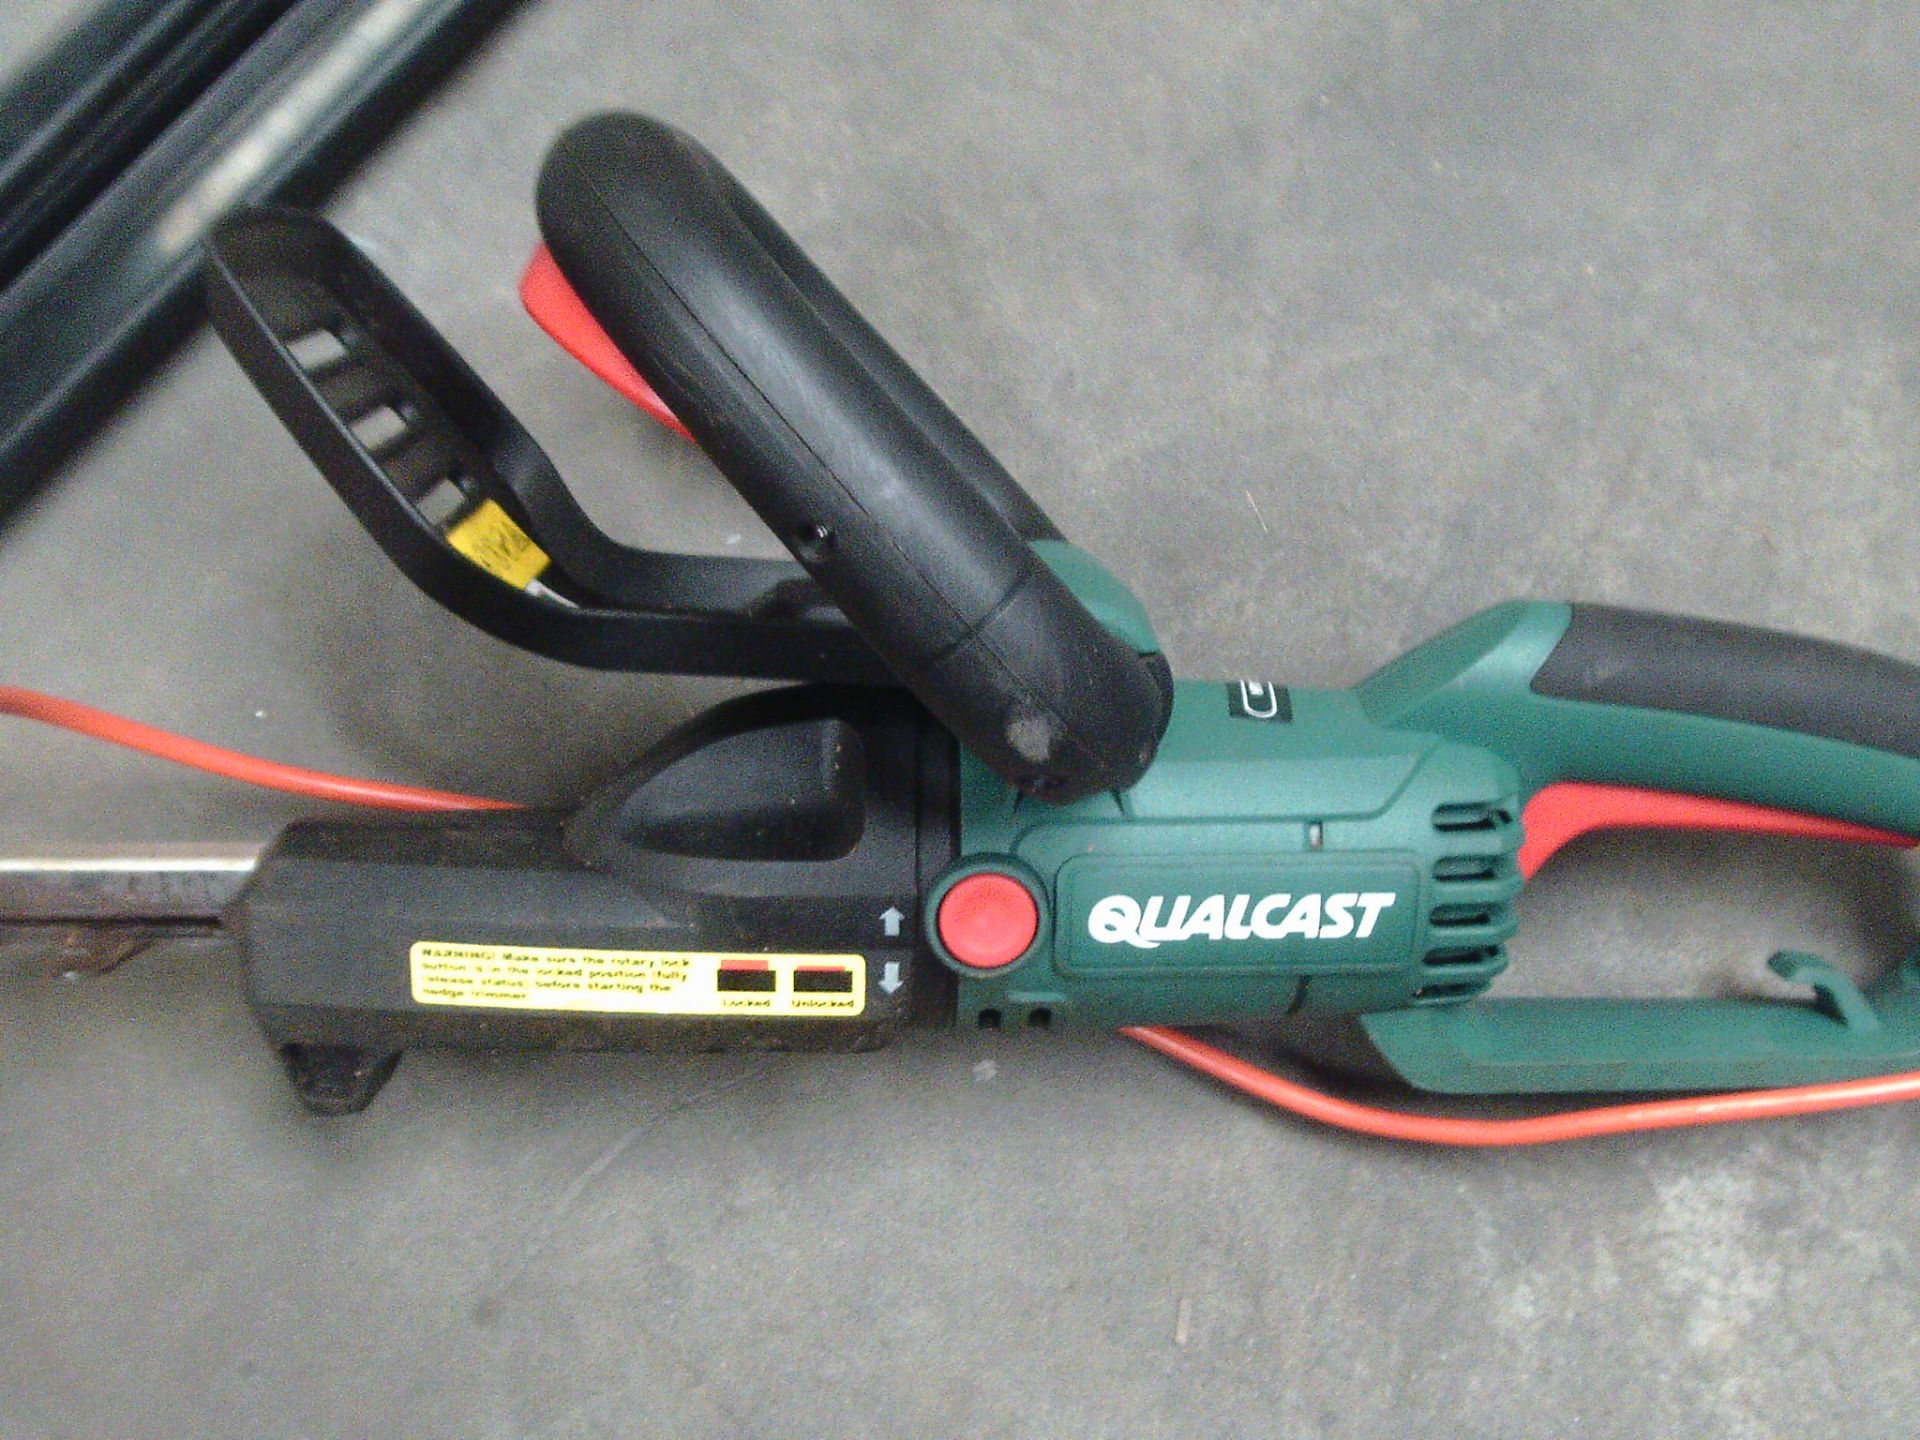 Qualcast electric hedge trimmer - tested working - Image 4 of 4